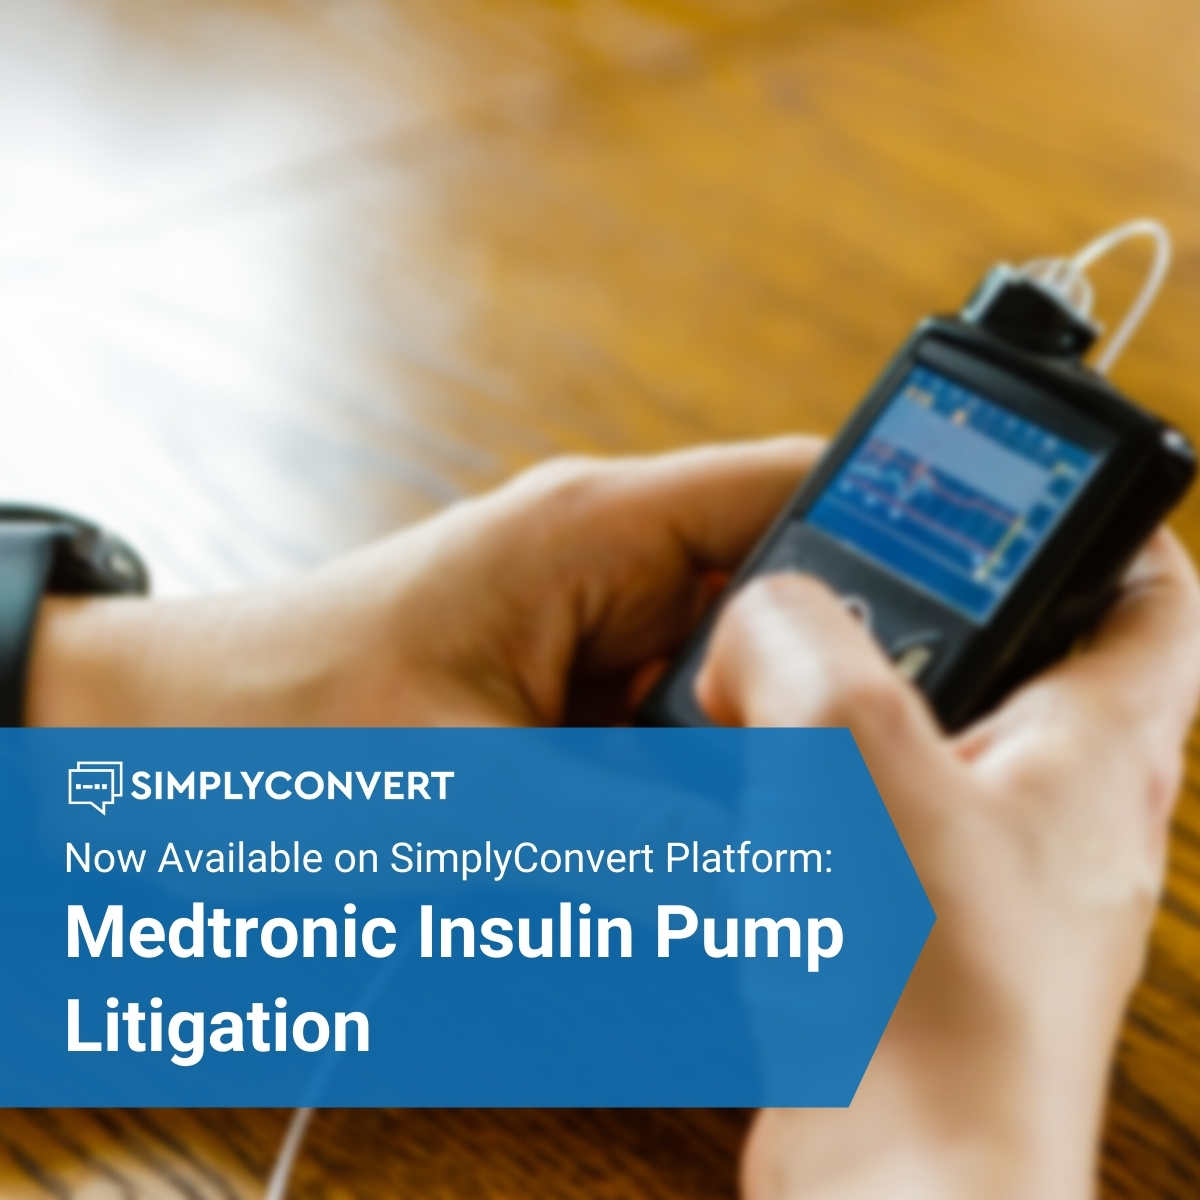 Person checking Medtronic insulin pump